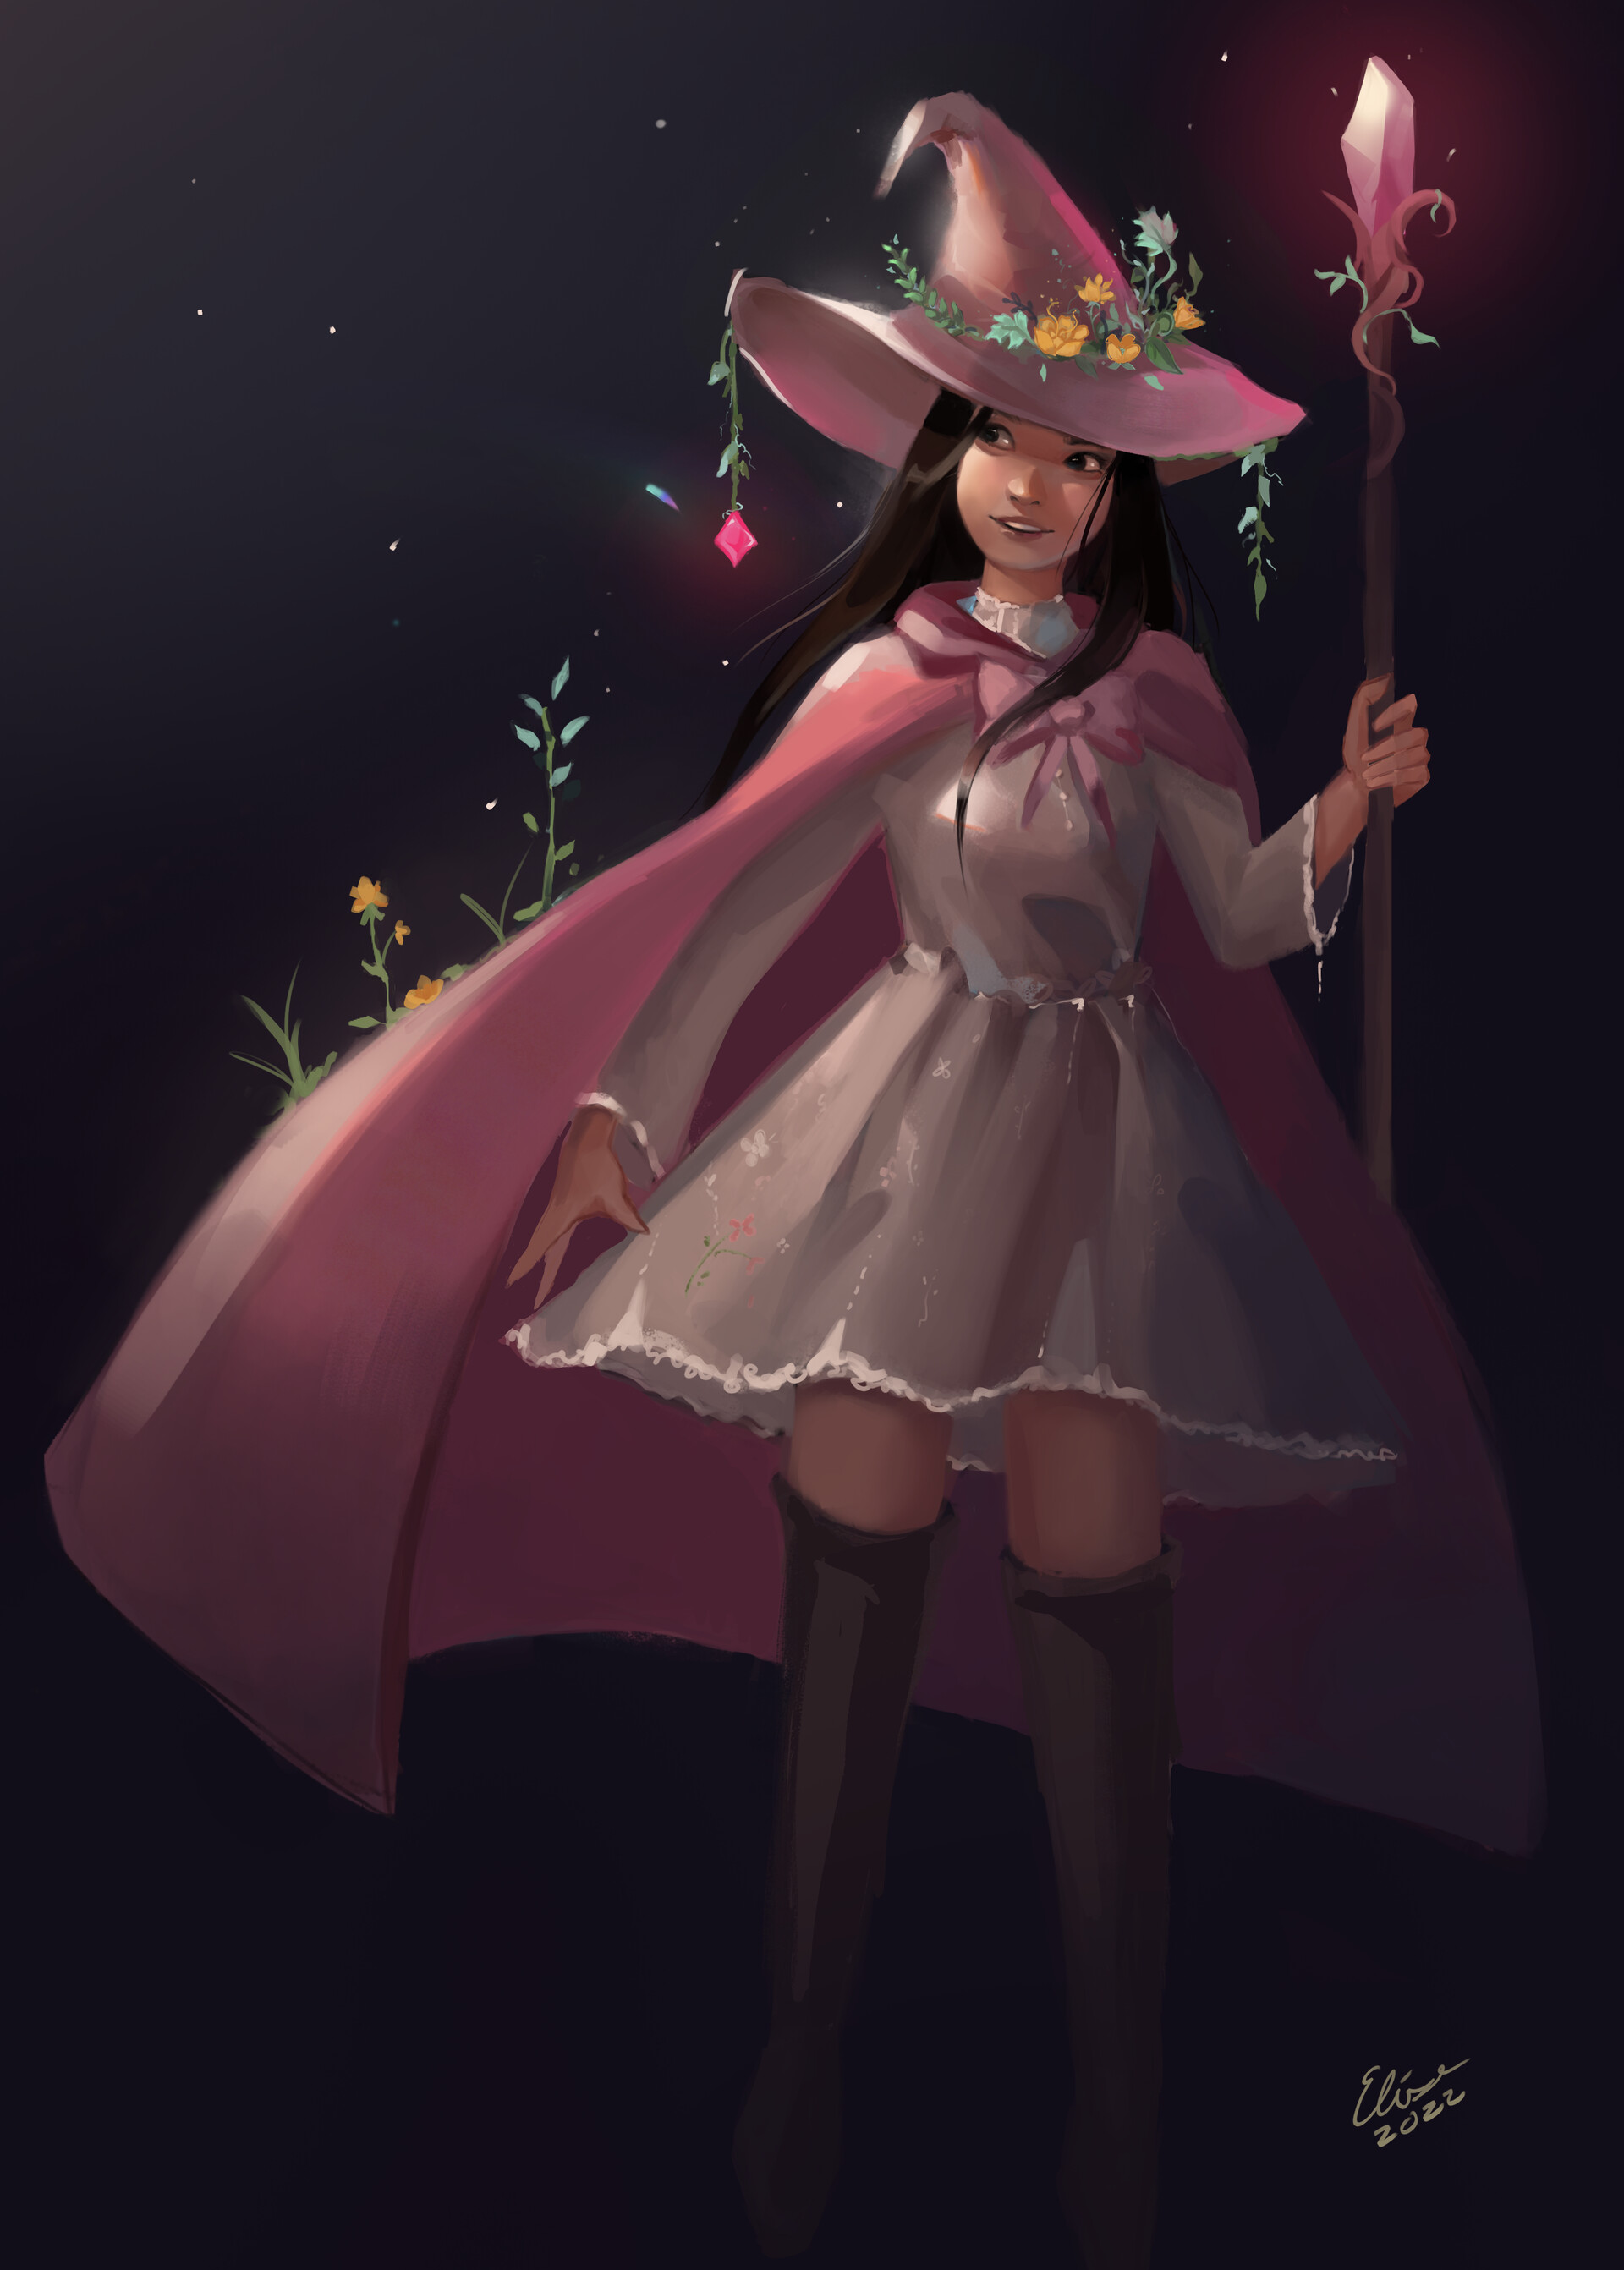 ArtStation - The Witch and The Flower